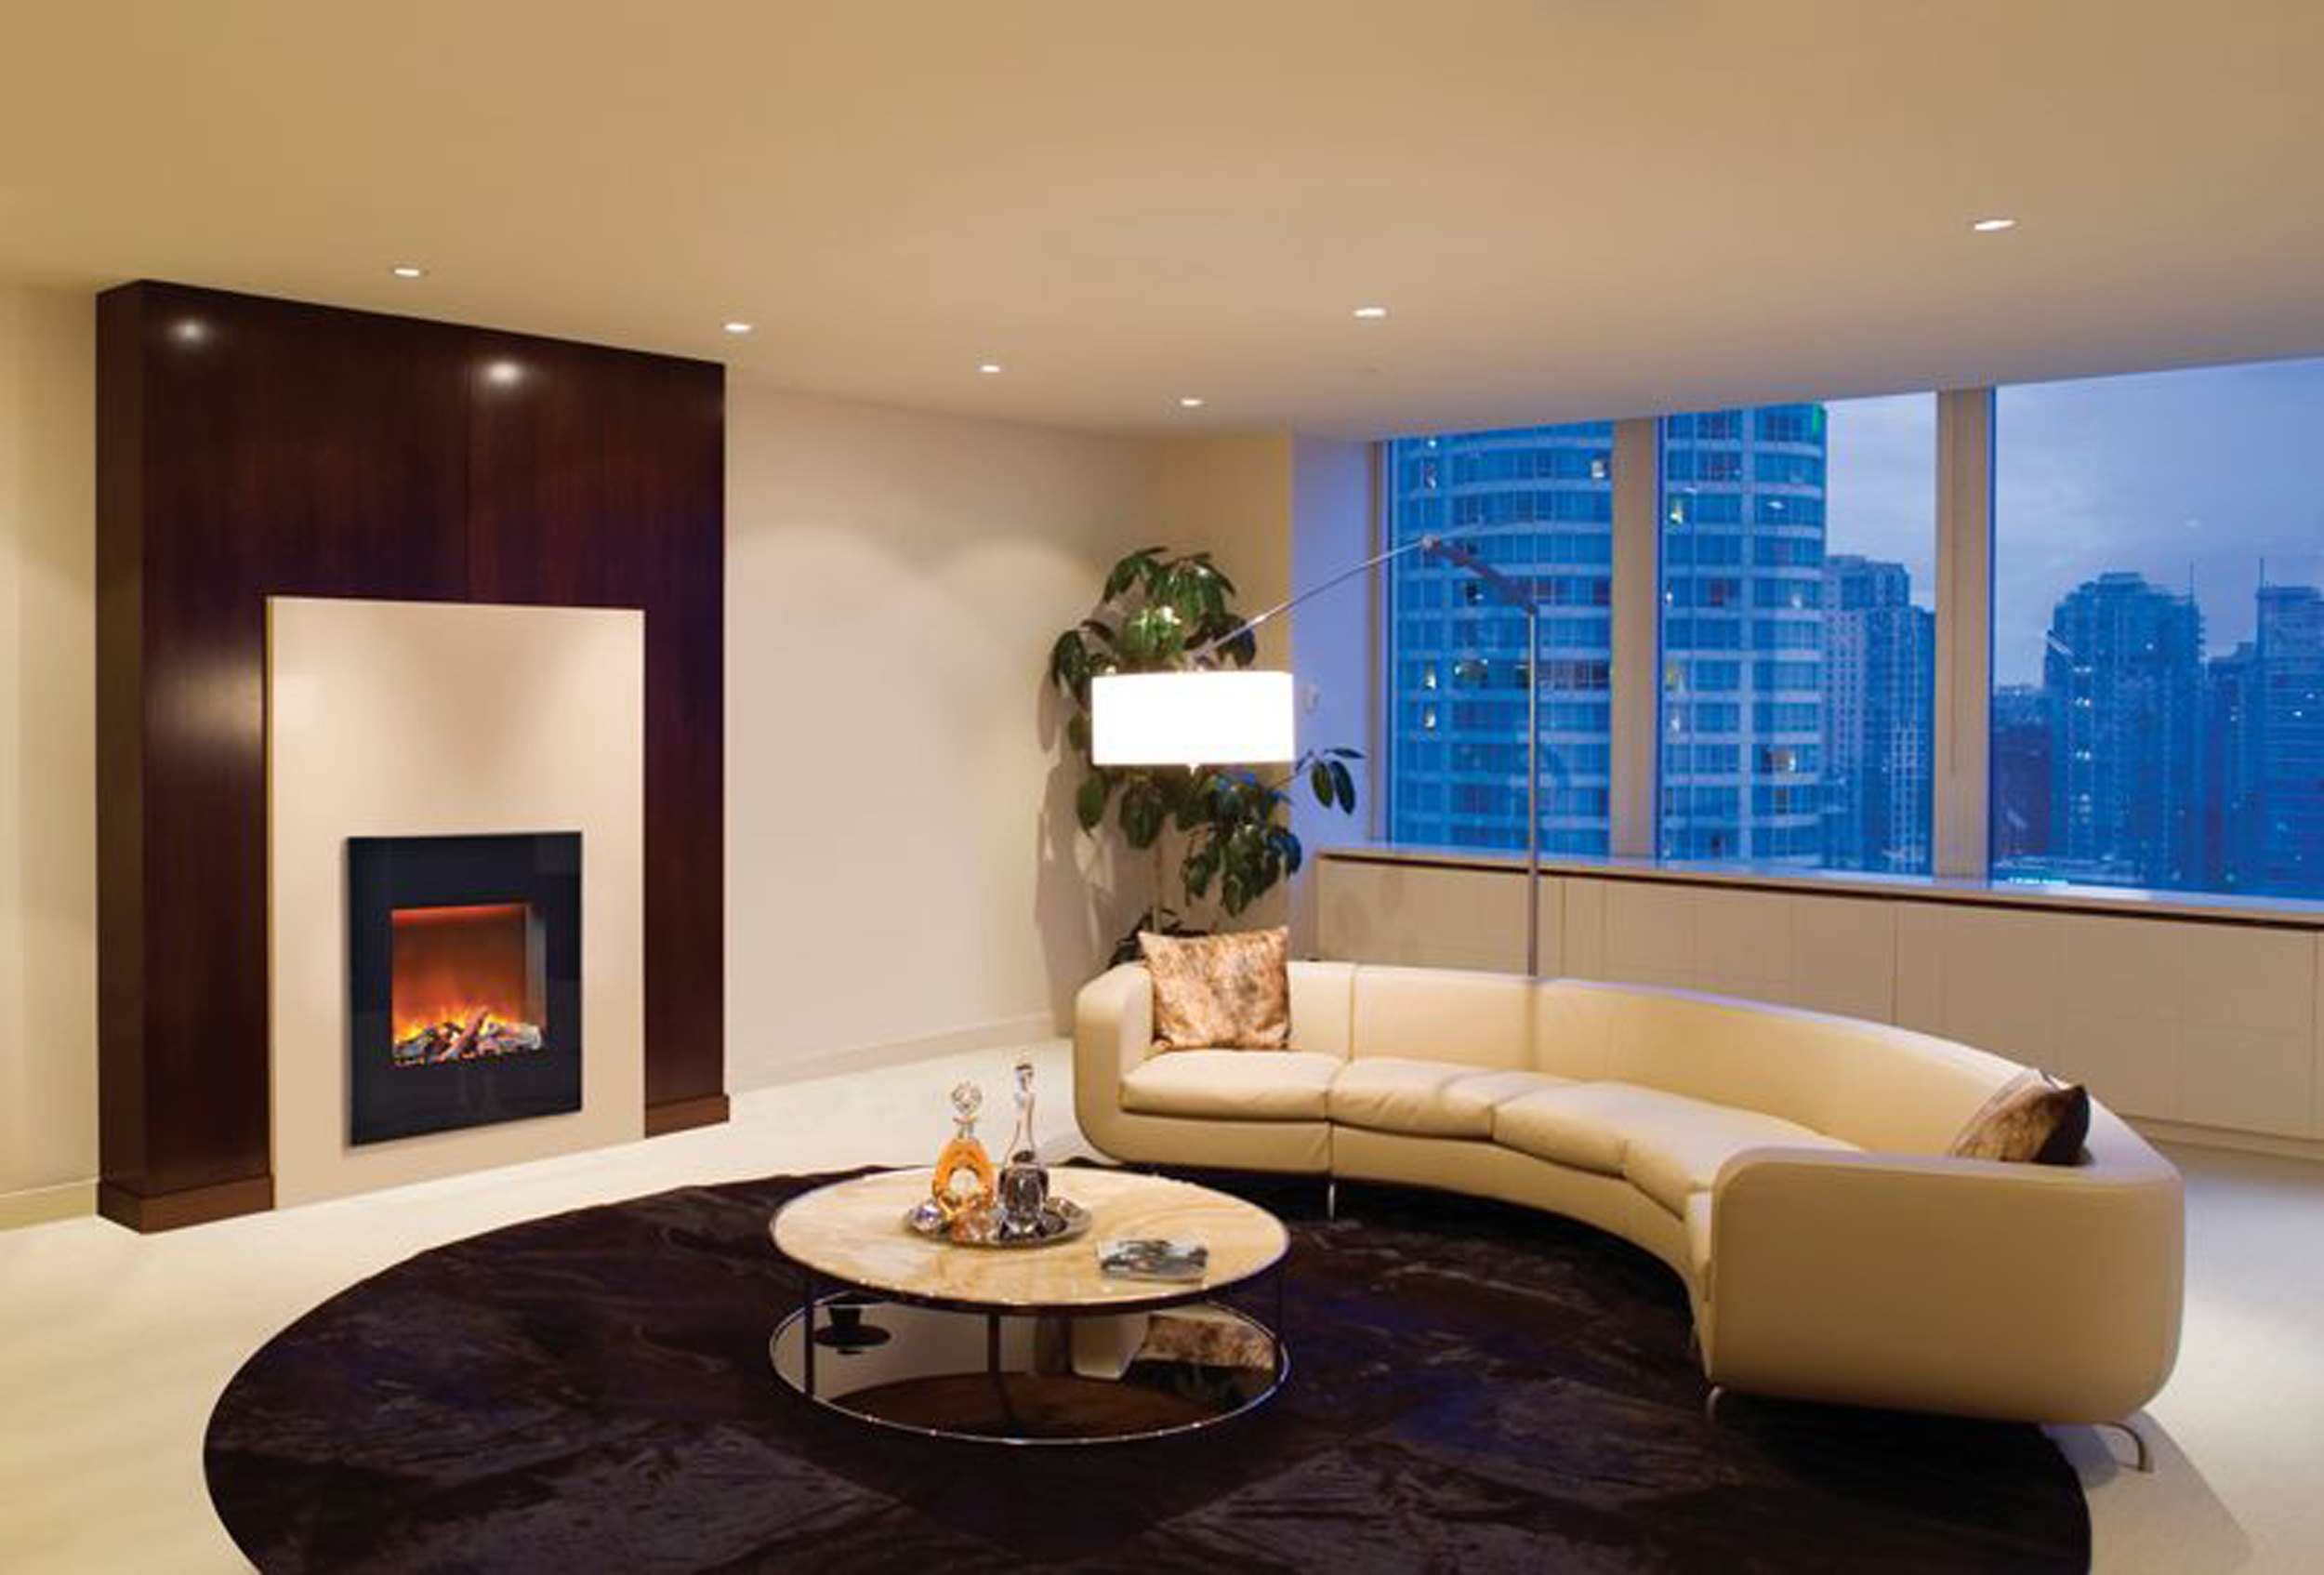 How to Use a Fireplace in an Apartment